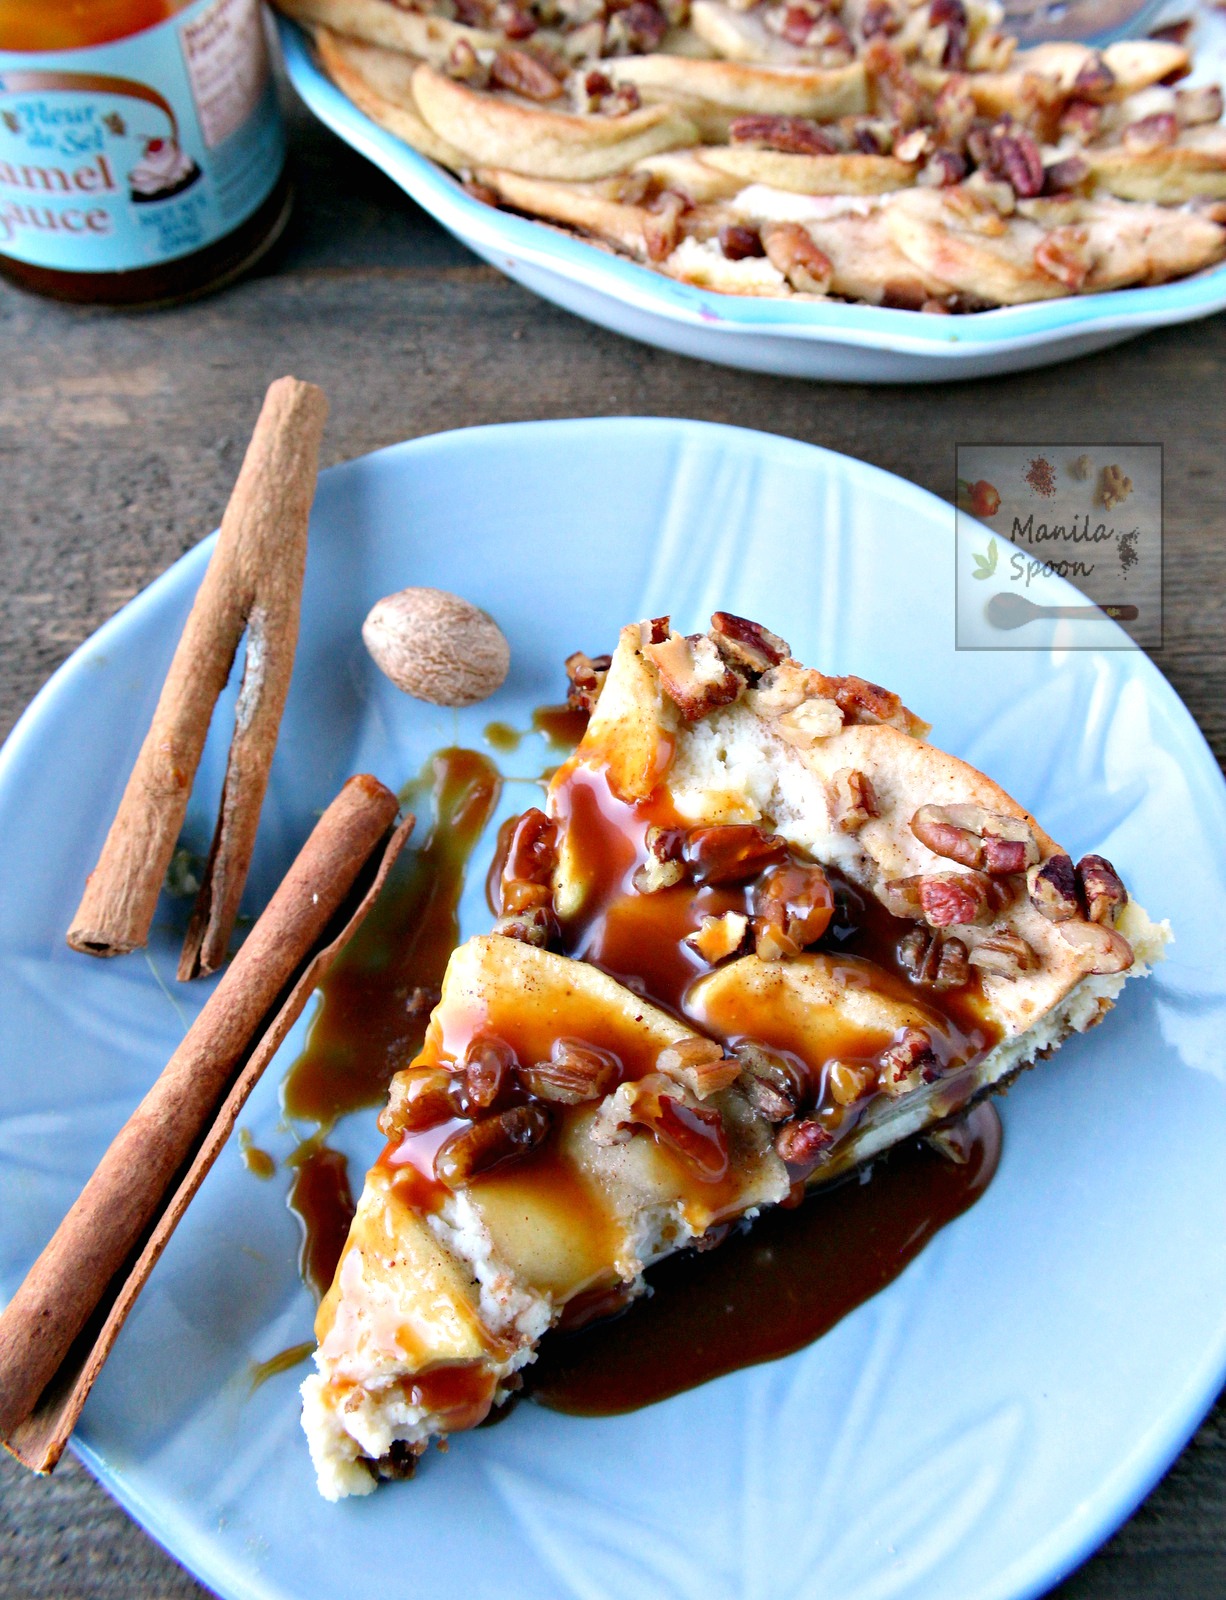 This easy and luscious fruity dessert combines the flavors of Apple Pie and Cheesecake so you can enjoy both! Make it ahead for fuss-free entertaining. Drizzle some caramel sauce on top for extra yum! | manilaspoon.com